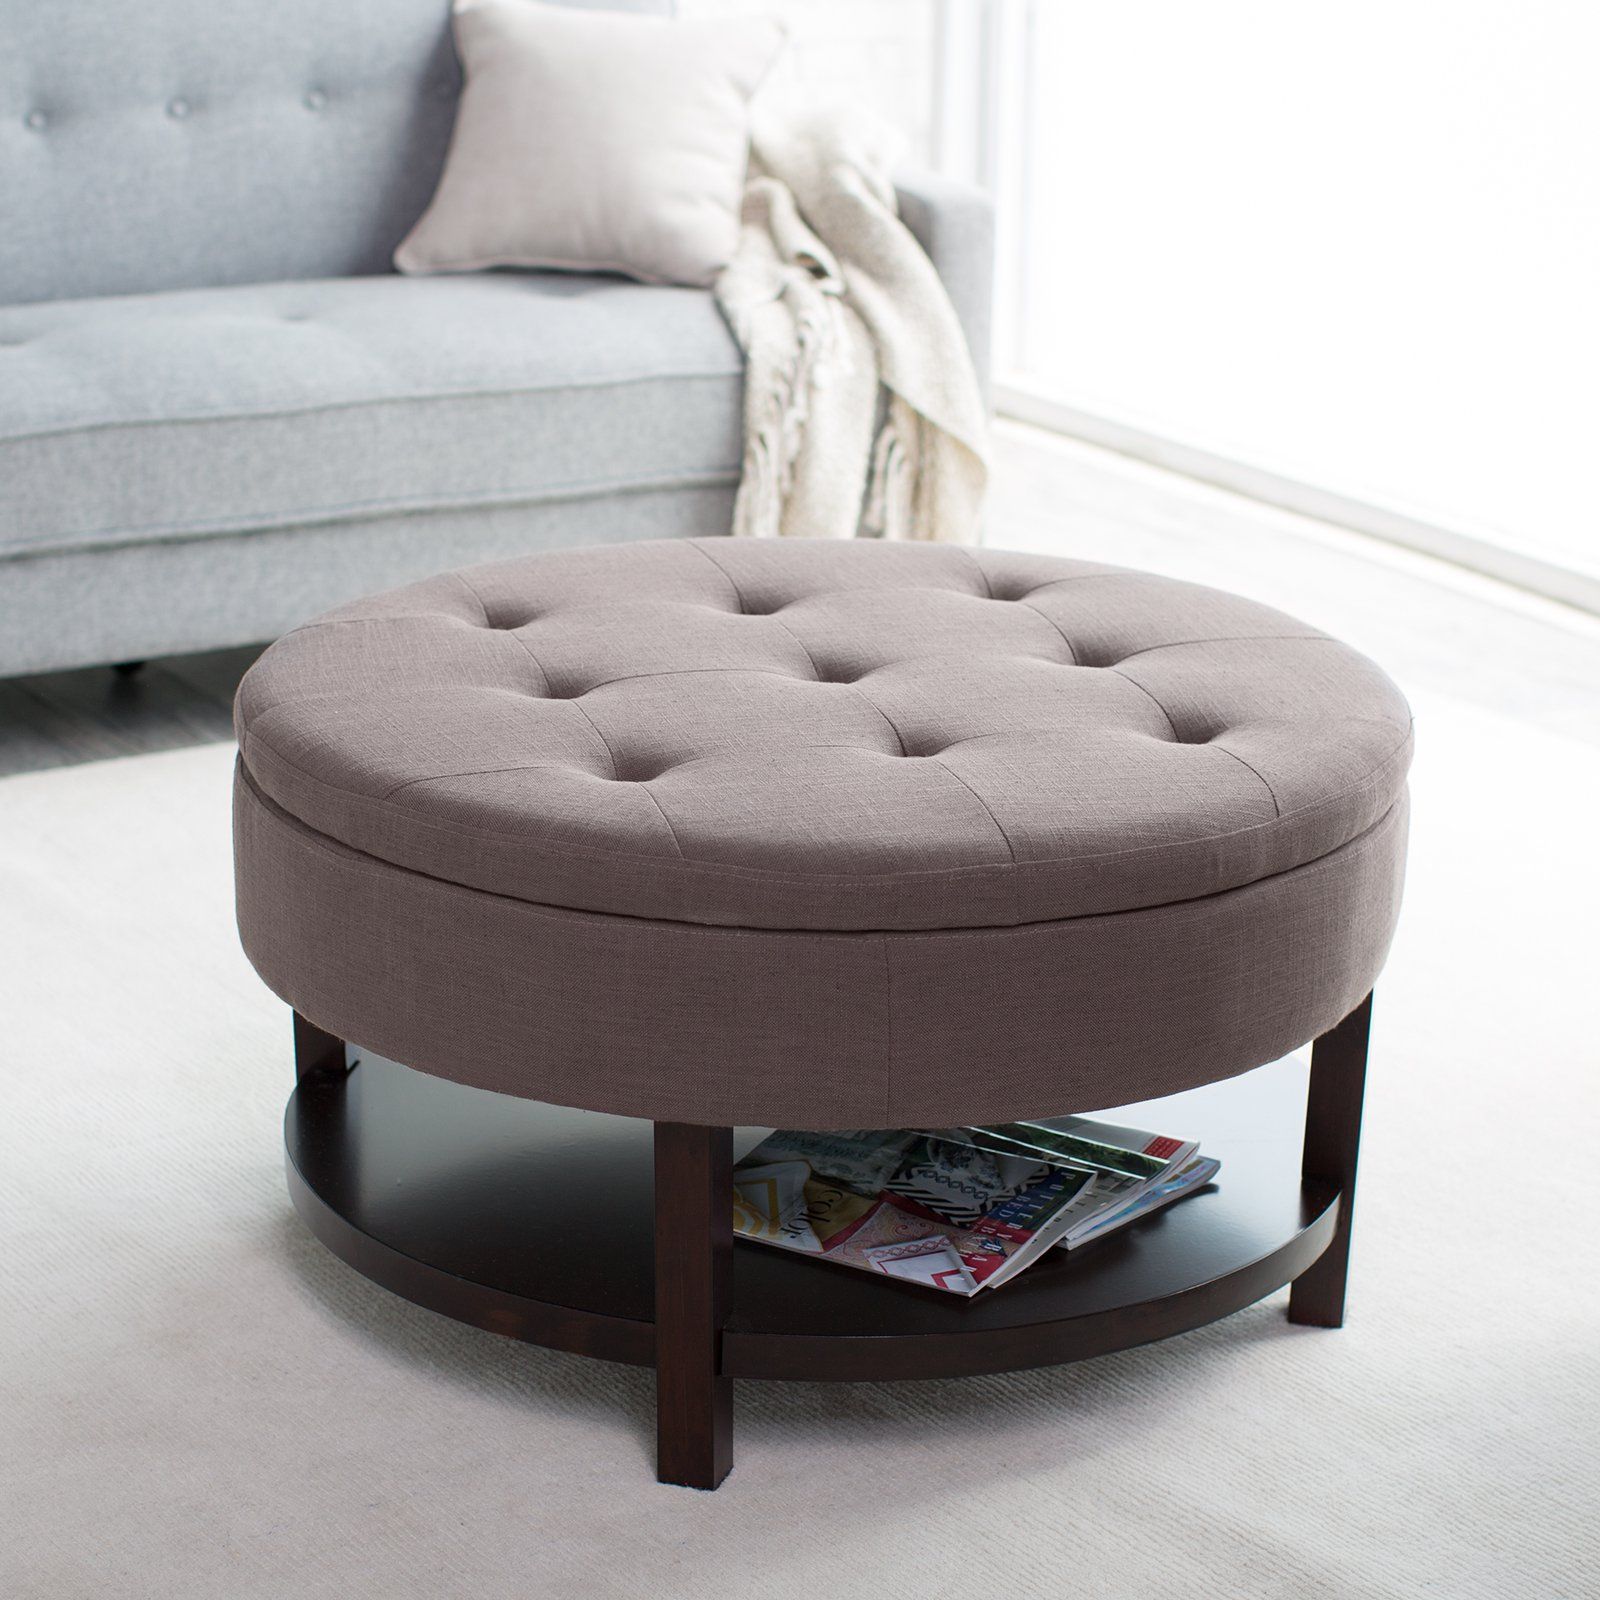 Tufted Coffee Table With Storage Round Upholstered Ottoman Coffee Table Round Ottoman Coffee Table With Storage (View 8 of 10)